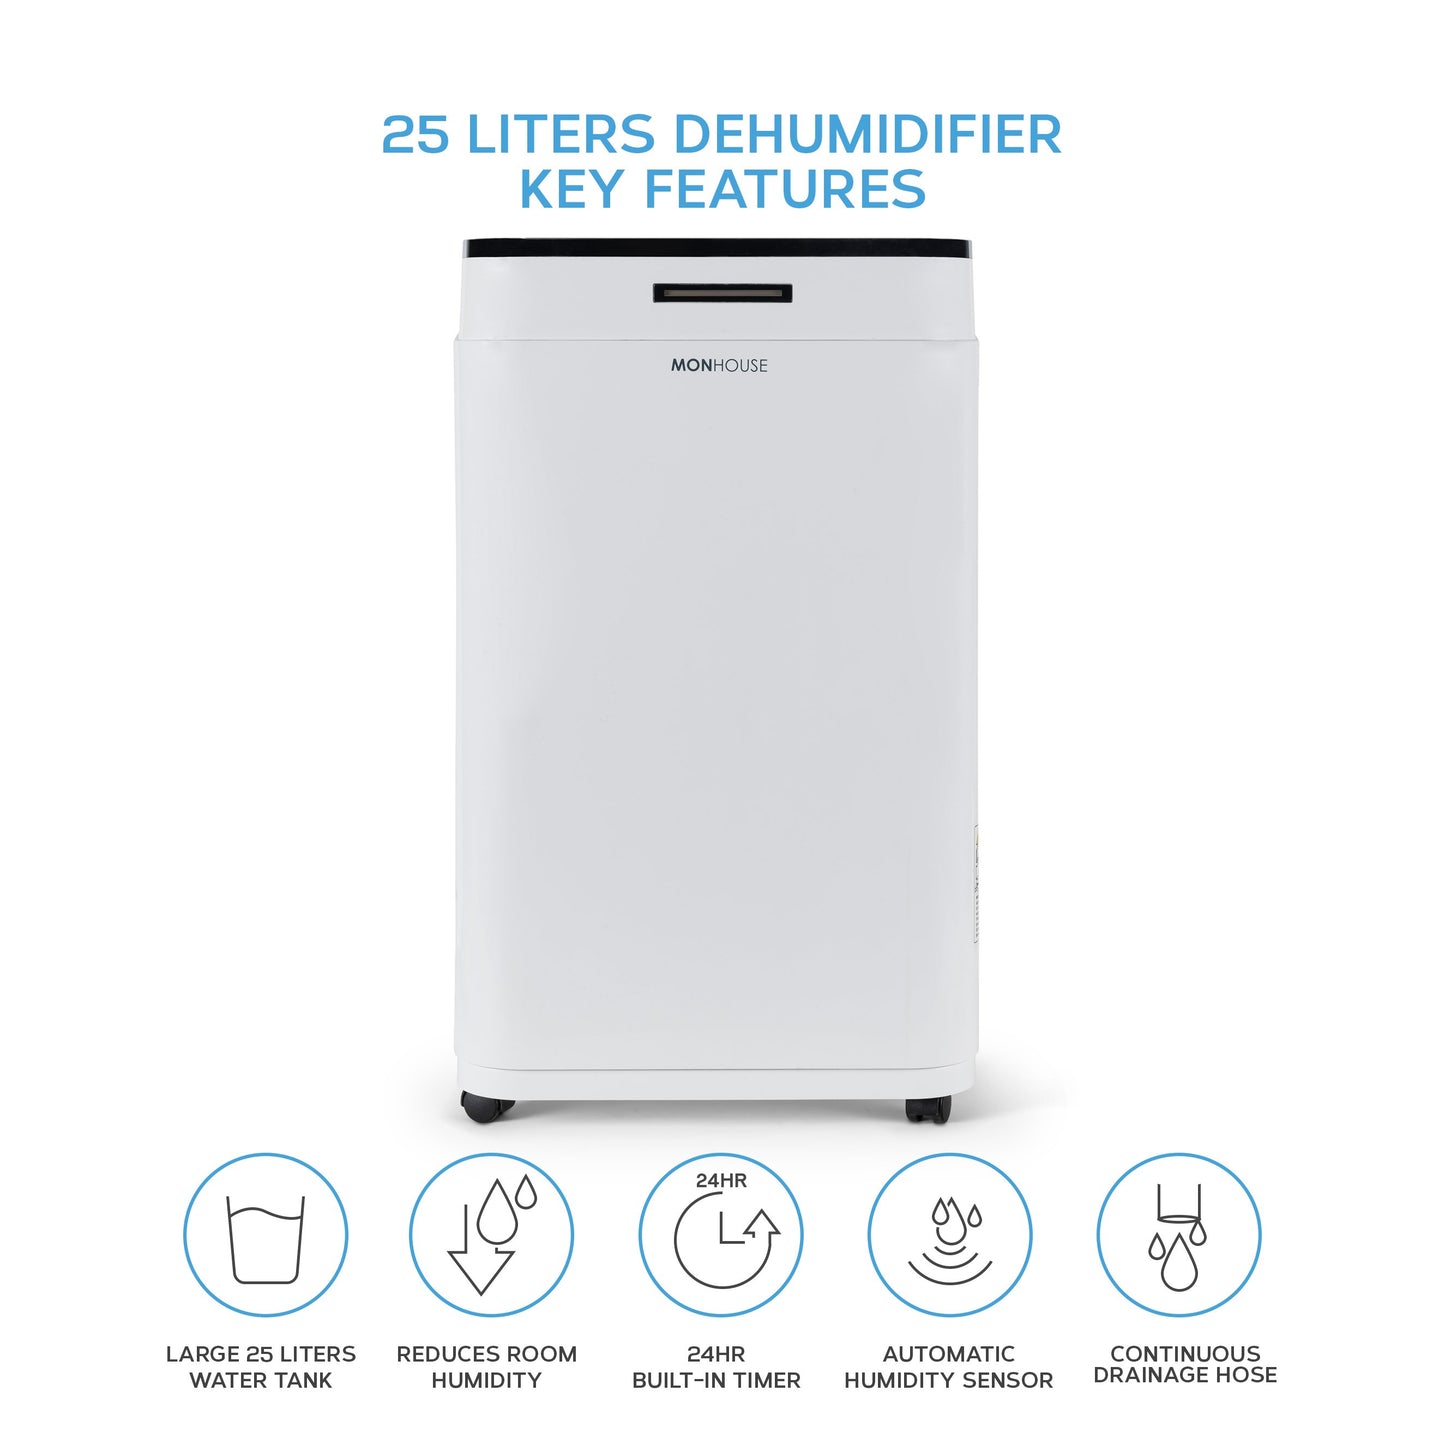 MONHOUSE 25L/Day Digital Dehumidifier - Sleep Mode, 24 HR Timer For Home, Laundry, Bedroom, Basement, Garage & Kitchen - Portable Electric Mould, Damp, Condensation Remover - Quiet Moisture Absorber